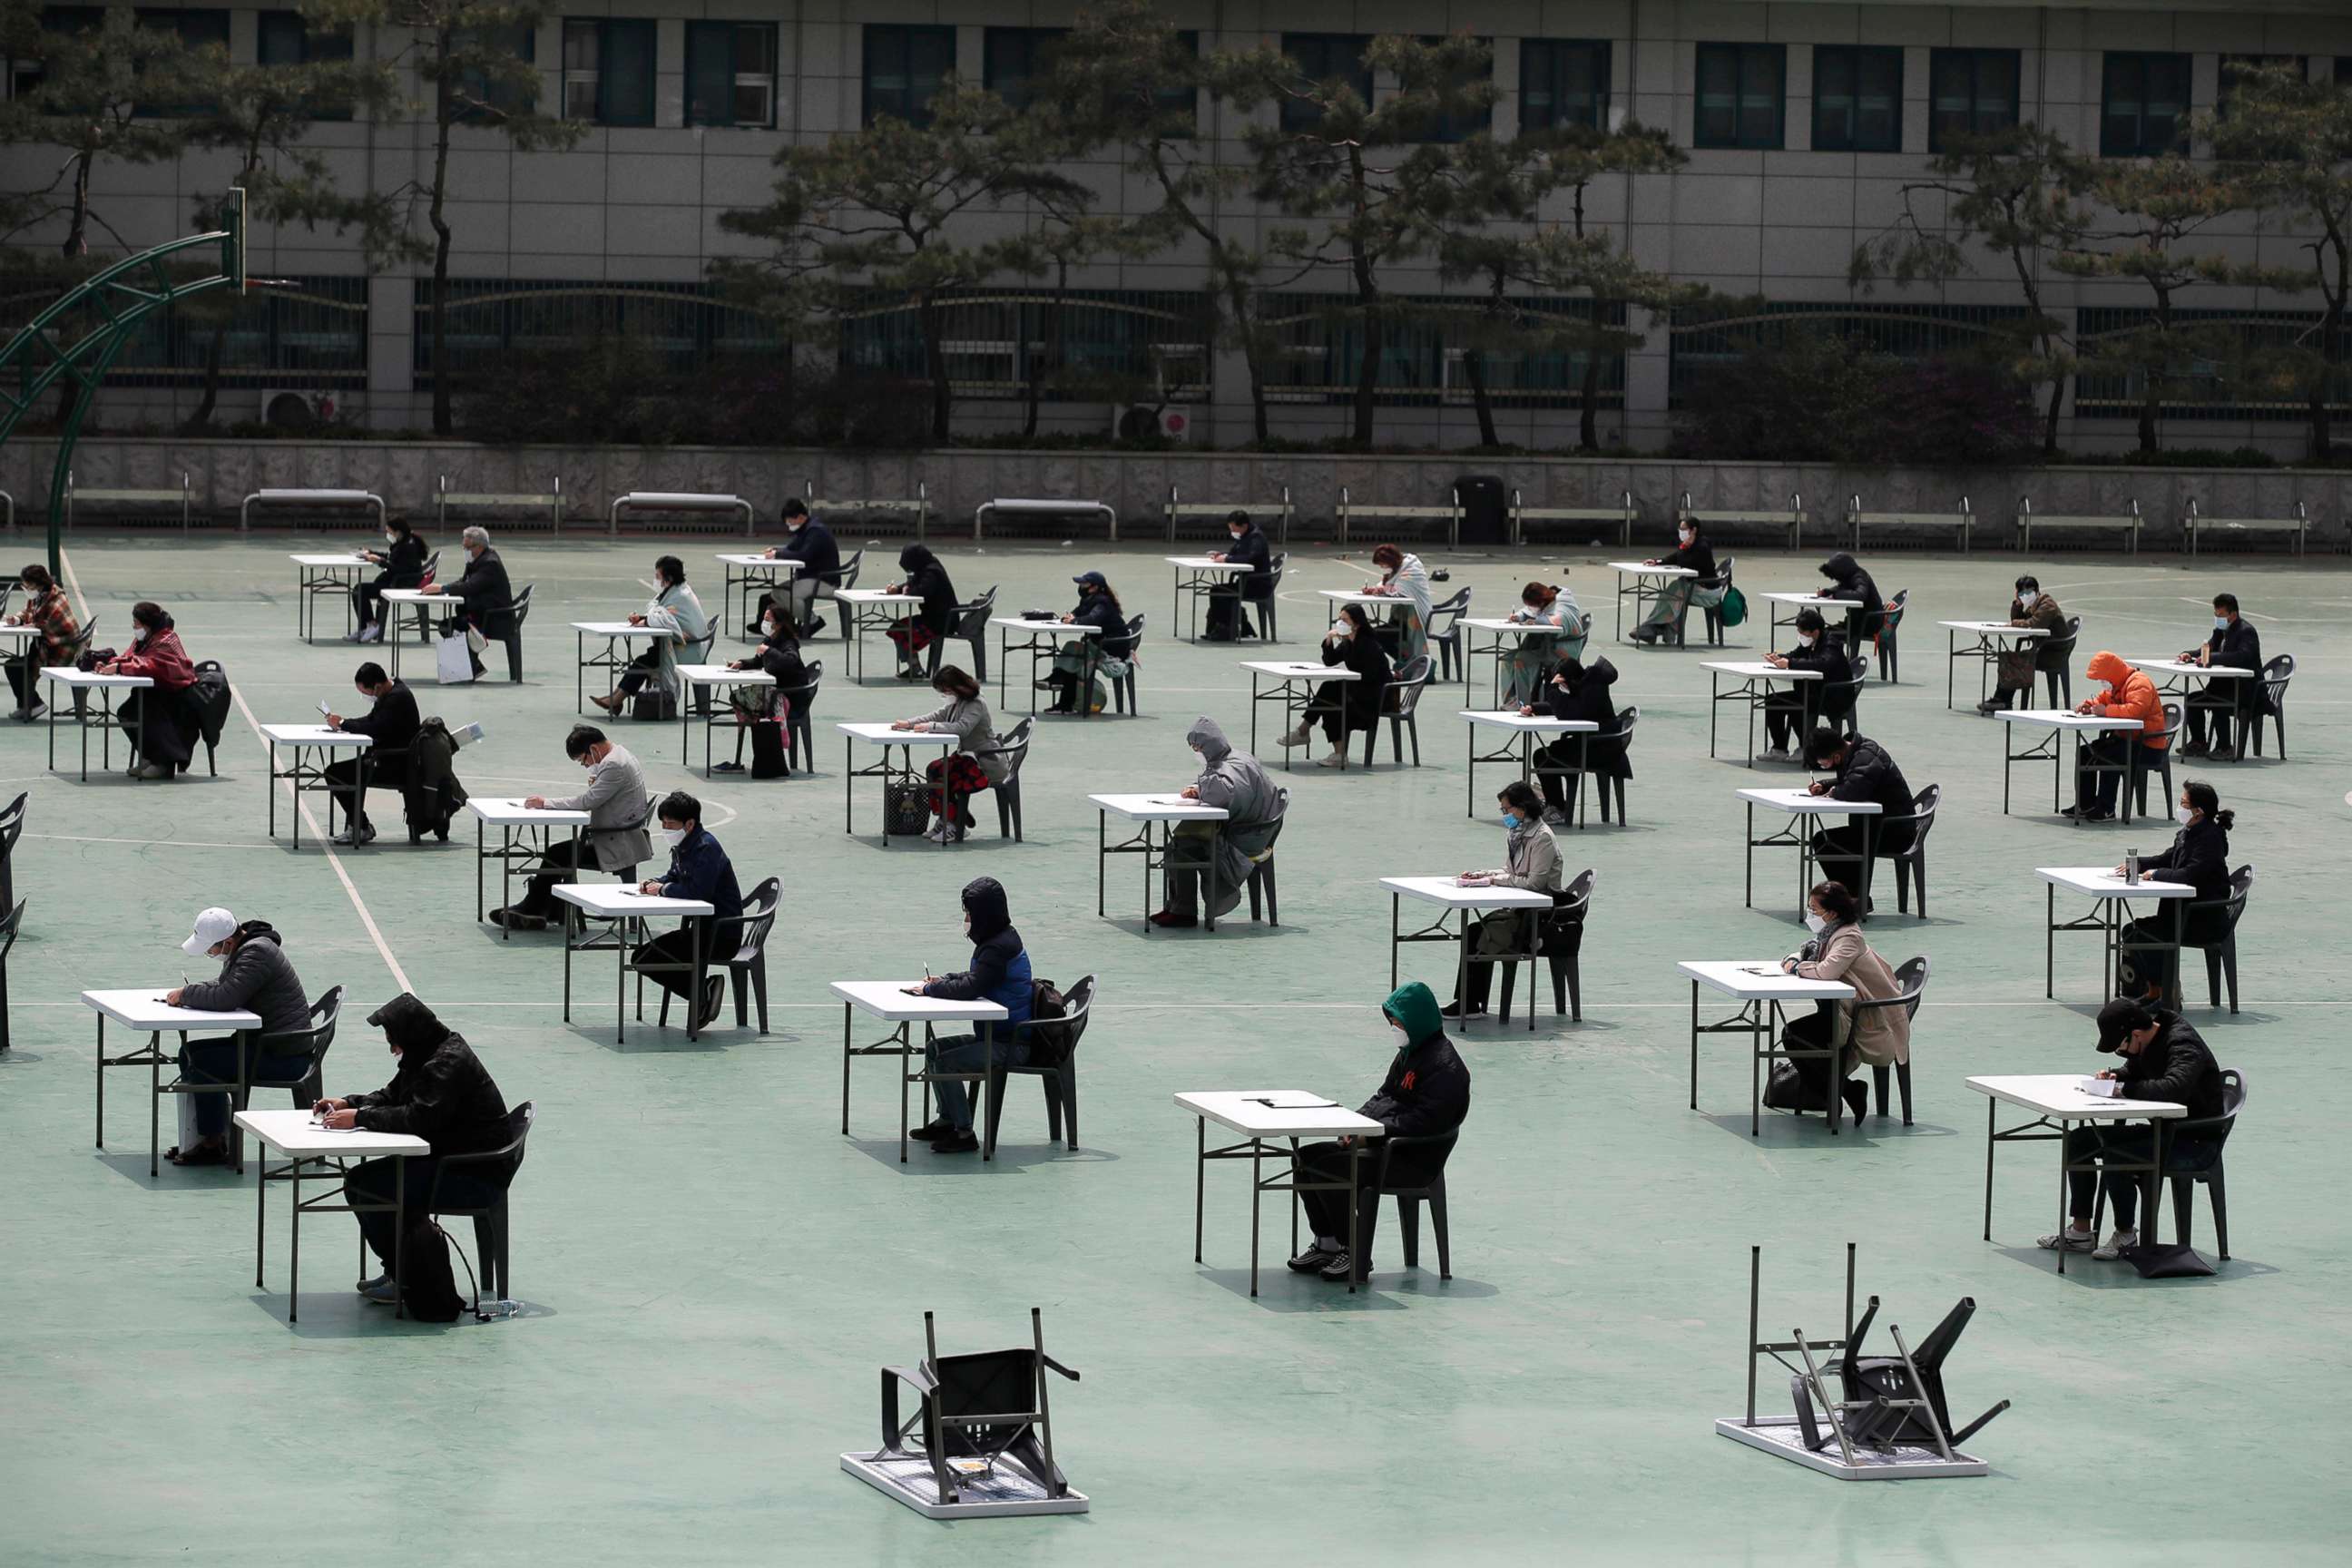 PHOTO: Applicants sit for the written examination during an insurance planner qualification exam in Seoul, South Korea, April 25, 2020.